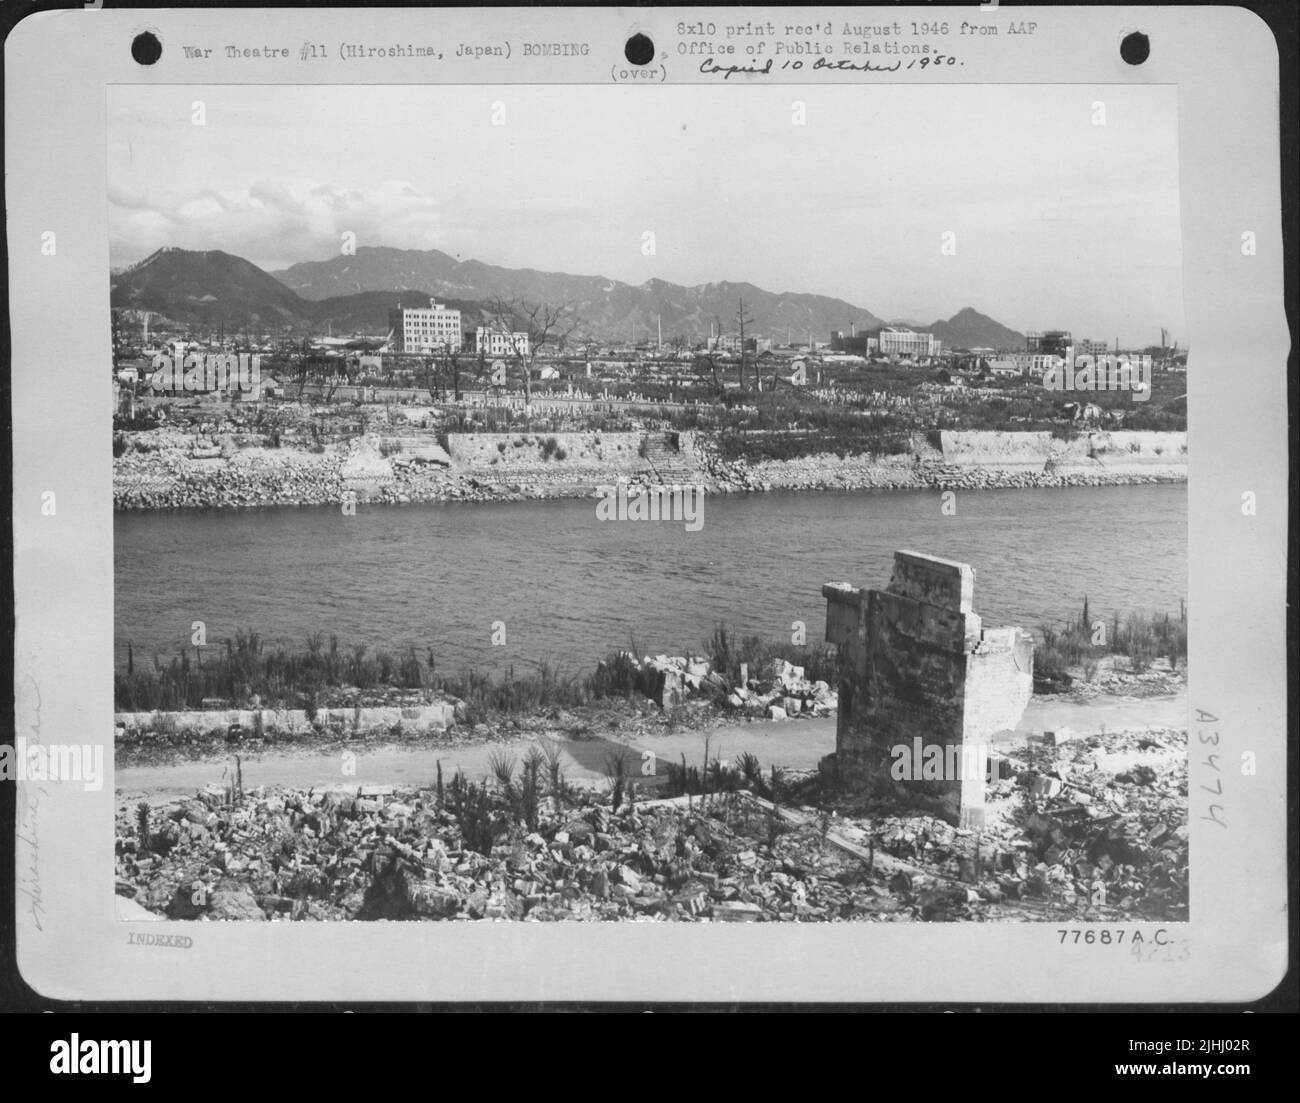 Pacific Air Command, U.S. Army, 3 August, 1946 - Looking Across One Of The Rivers That Flow Through The Ruins Of Hiroshima, Japan, The Awe Inspiring Sight Of Such A Large City Almost Completely Demolished By One Atomic Bomb Seems Unbelievable. The Barren Stock Photo